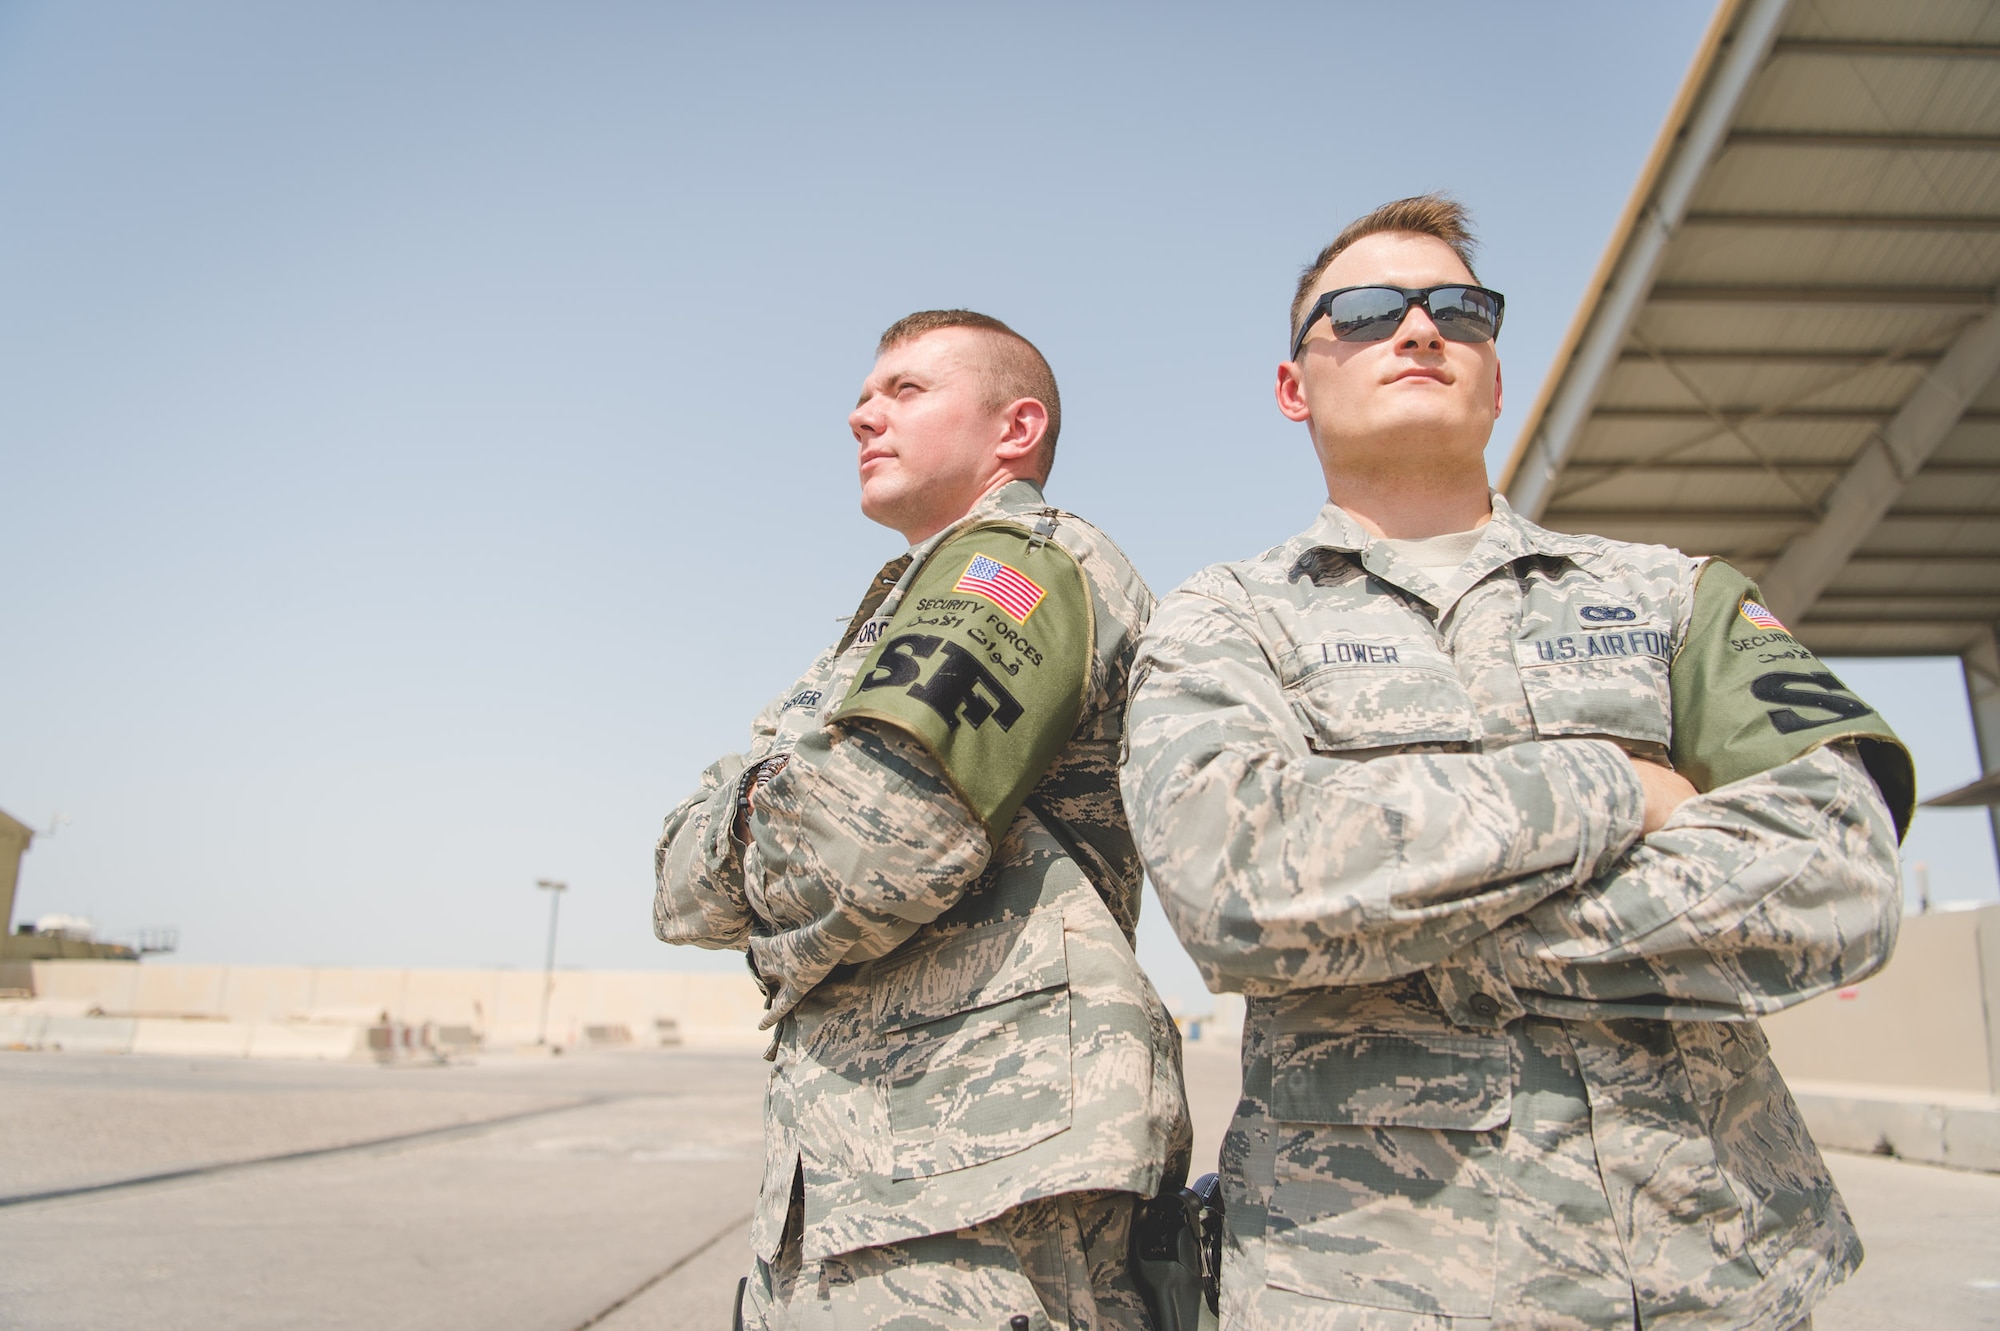 Airman 1st Class Reese Register (left) and Airman 1st Class William Lower, pose for a photo near the flightline Wednesday, July 26, 2017, at an undisclosed location in Southwest Asia. Register and Lower are both 387th Expeditionary Security Forces Squadron defenders who provided security for Secretary of State Rex Tillerson's recent visit to the region. (U.S. Air Force photo/1st Lt. Rashard Coaxum)